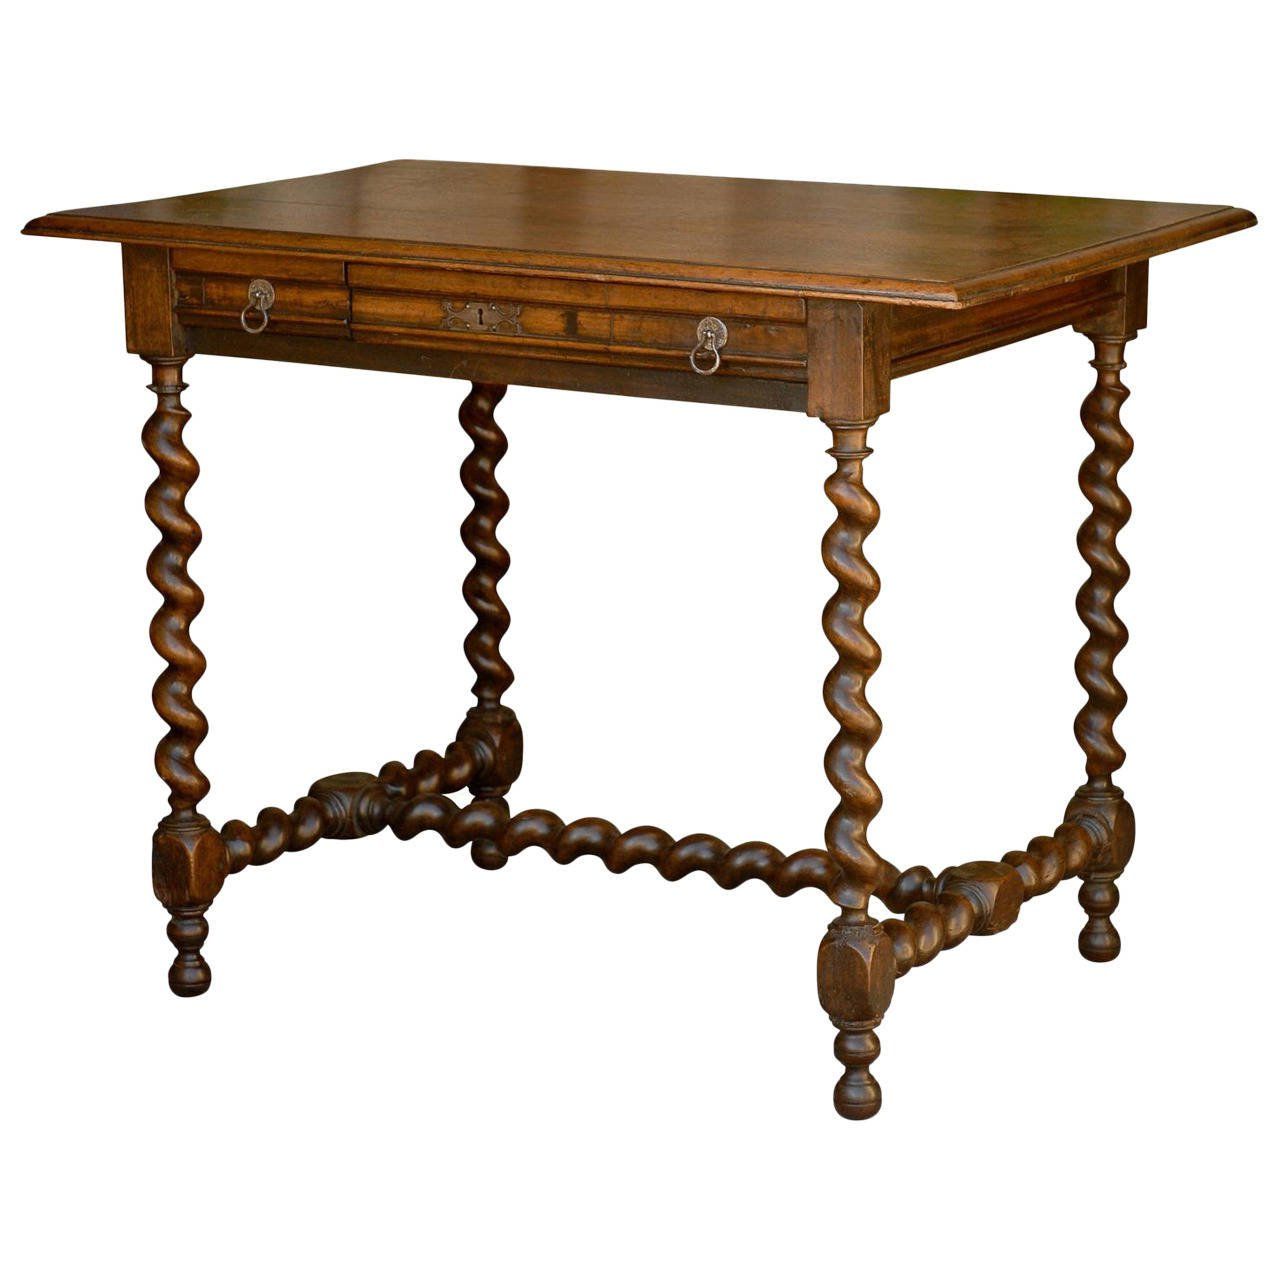 Barley Twist Coffee Tables Intended For Widely Used English Charles Ii Style Inlaid Centre Table With Barley Twist Base (View 11 of 20)